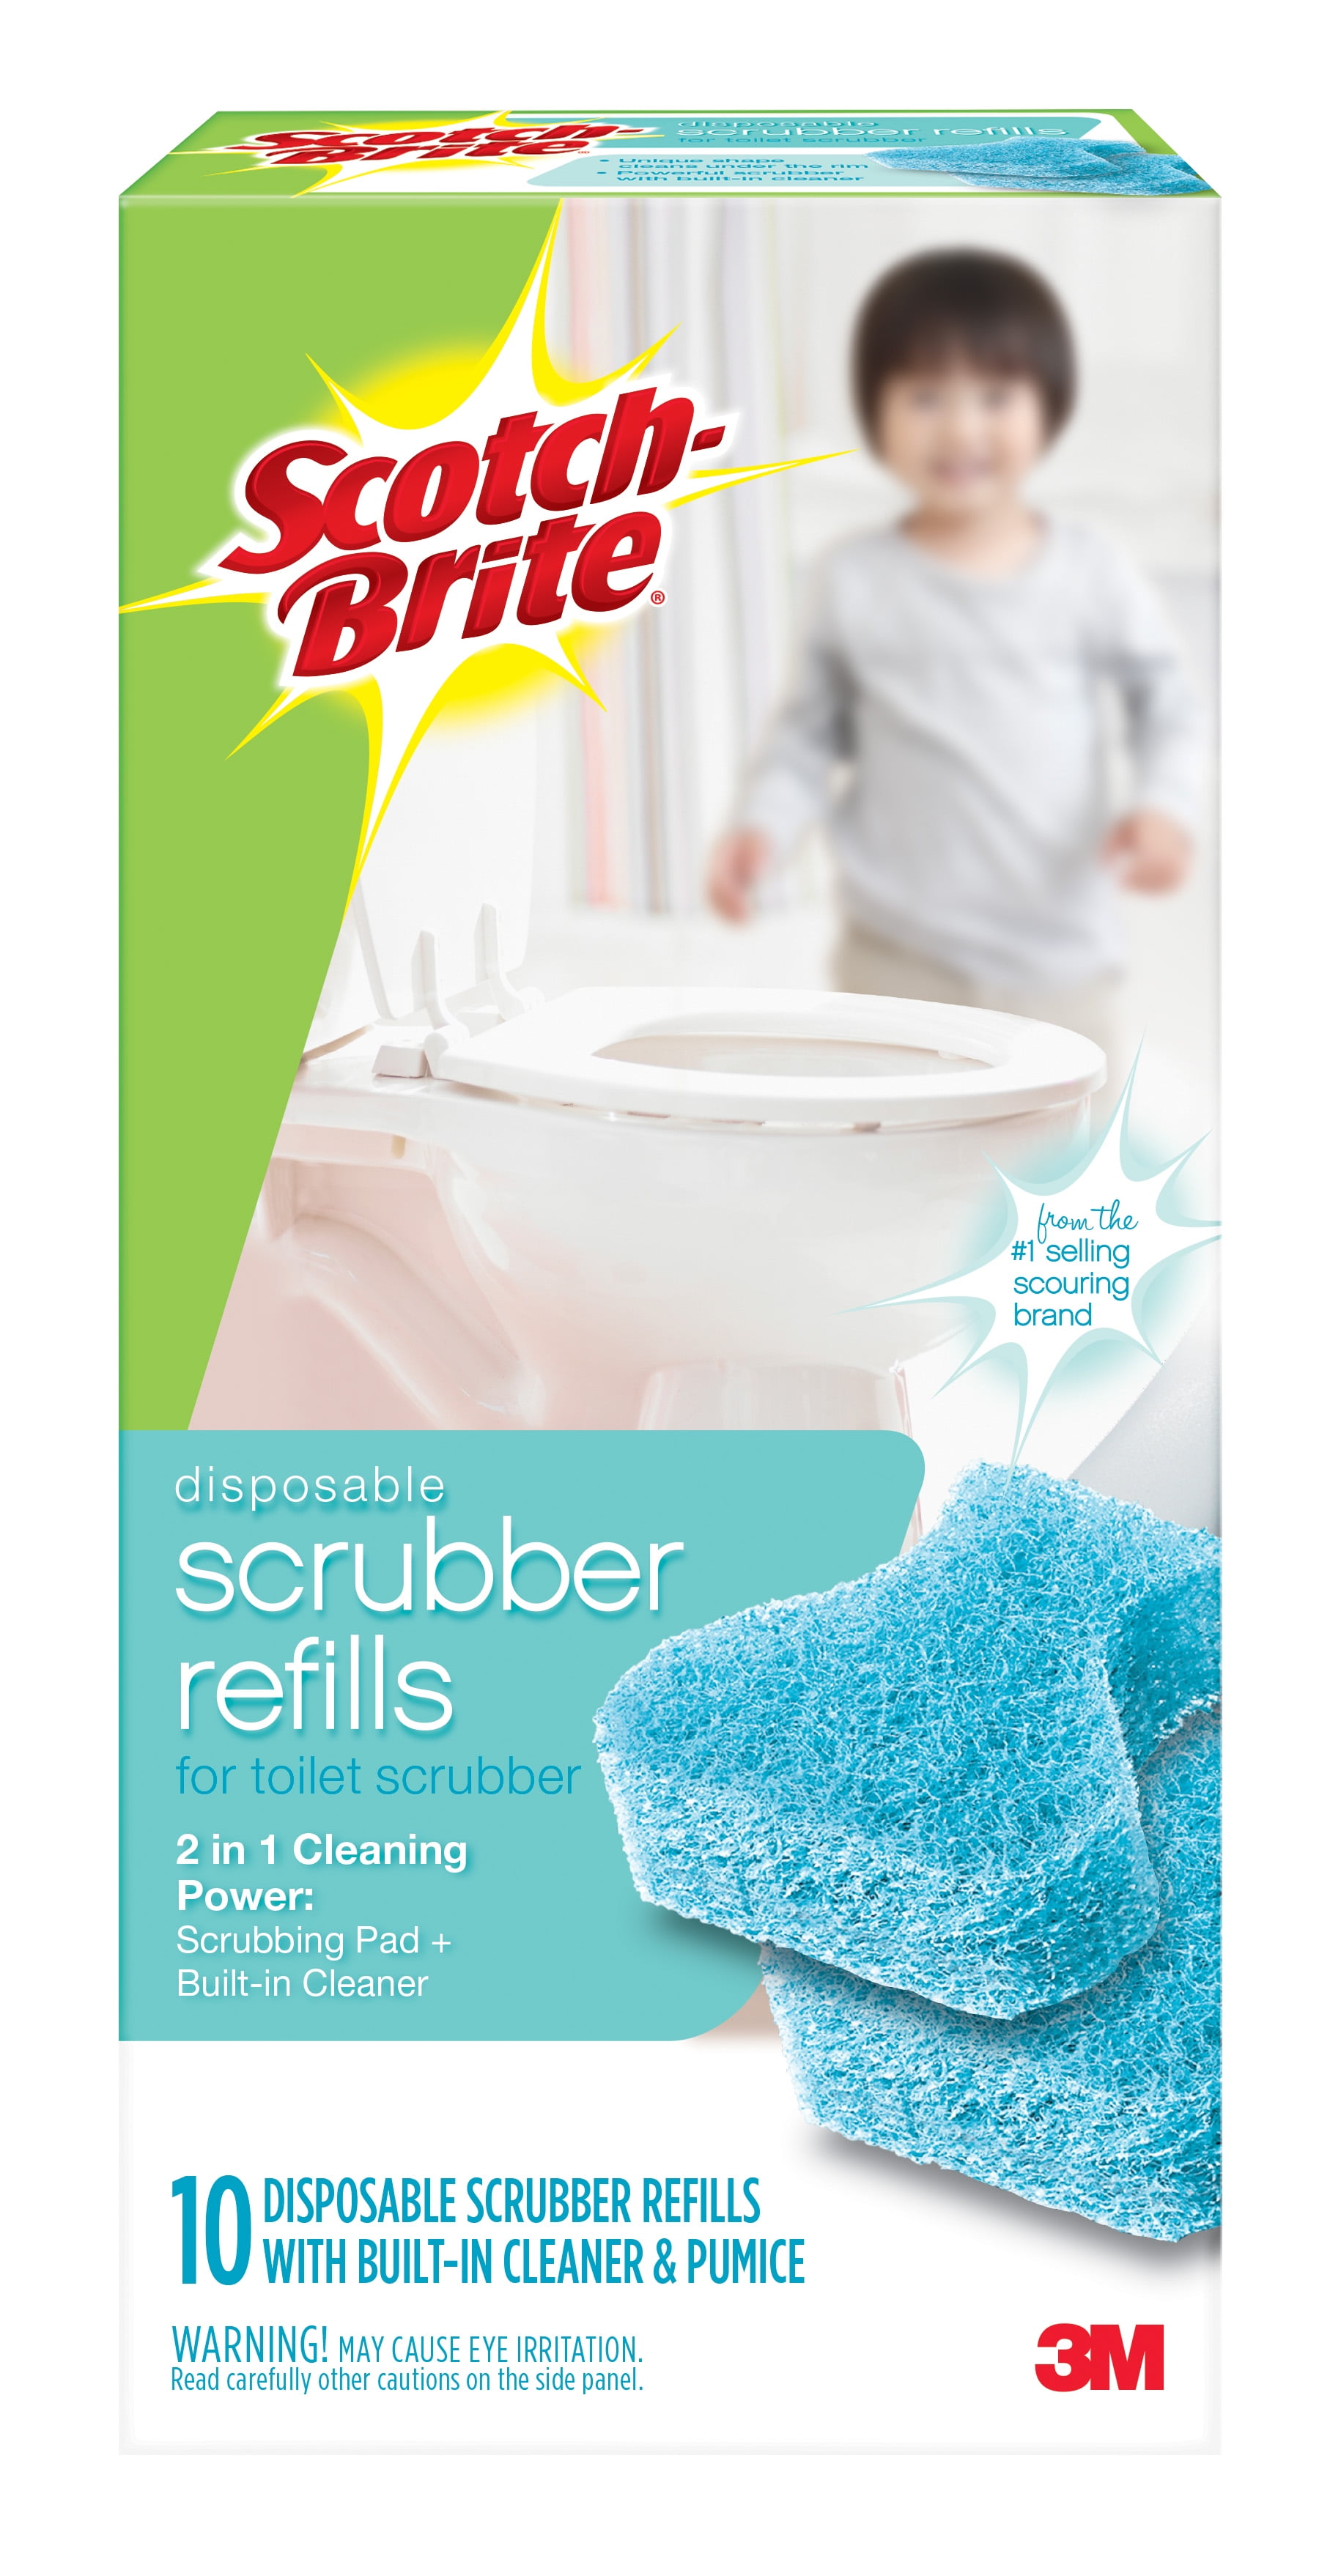 Scotch-Brite Scrub & Drop Toilet Cleaning System Refills, 6 count